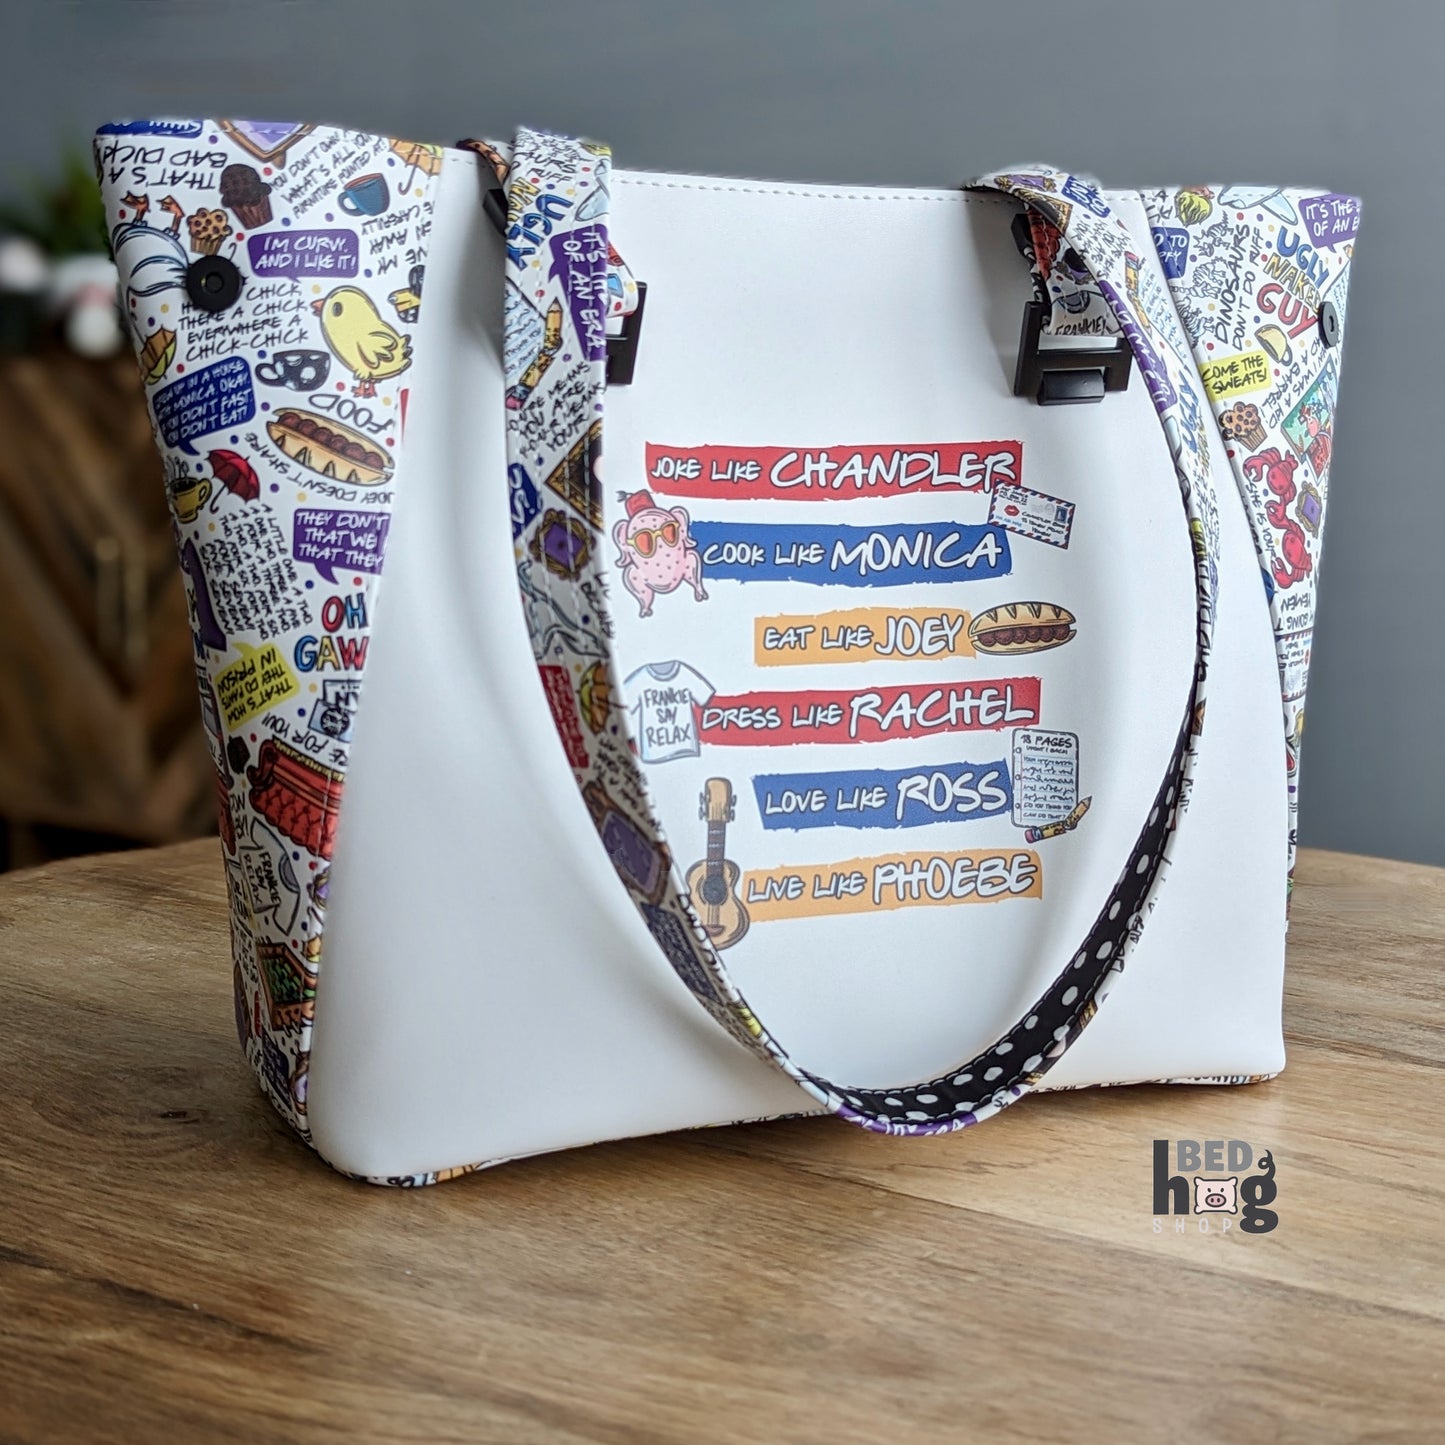 Coffee with Friends Tote